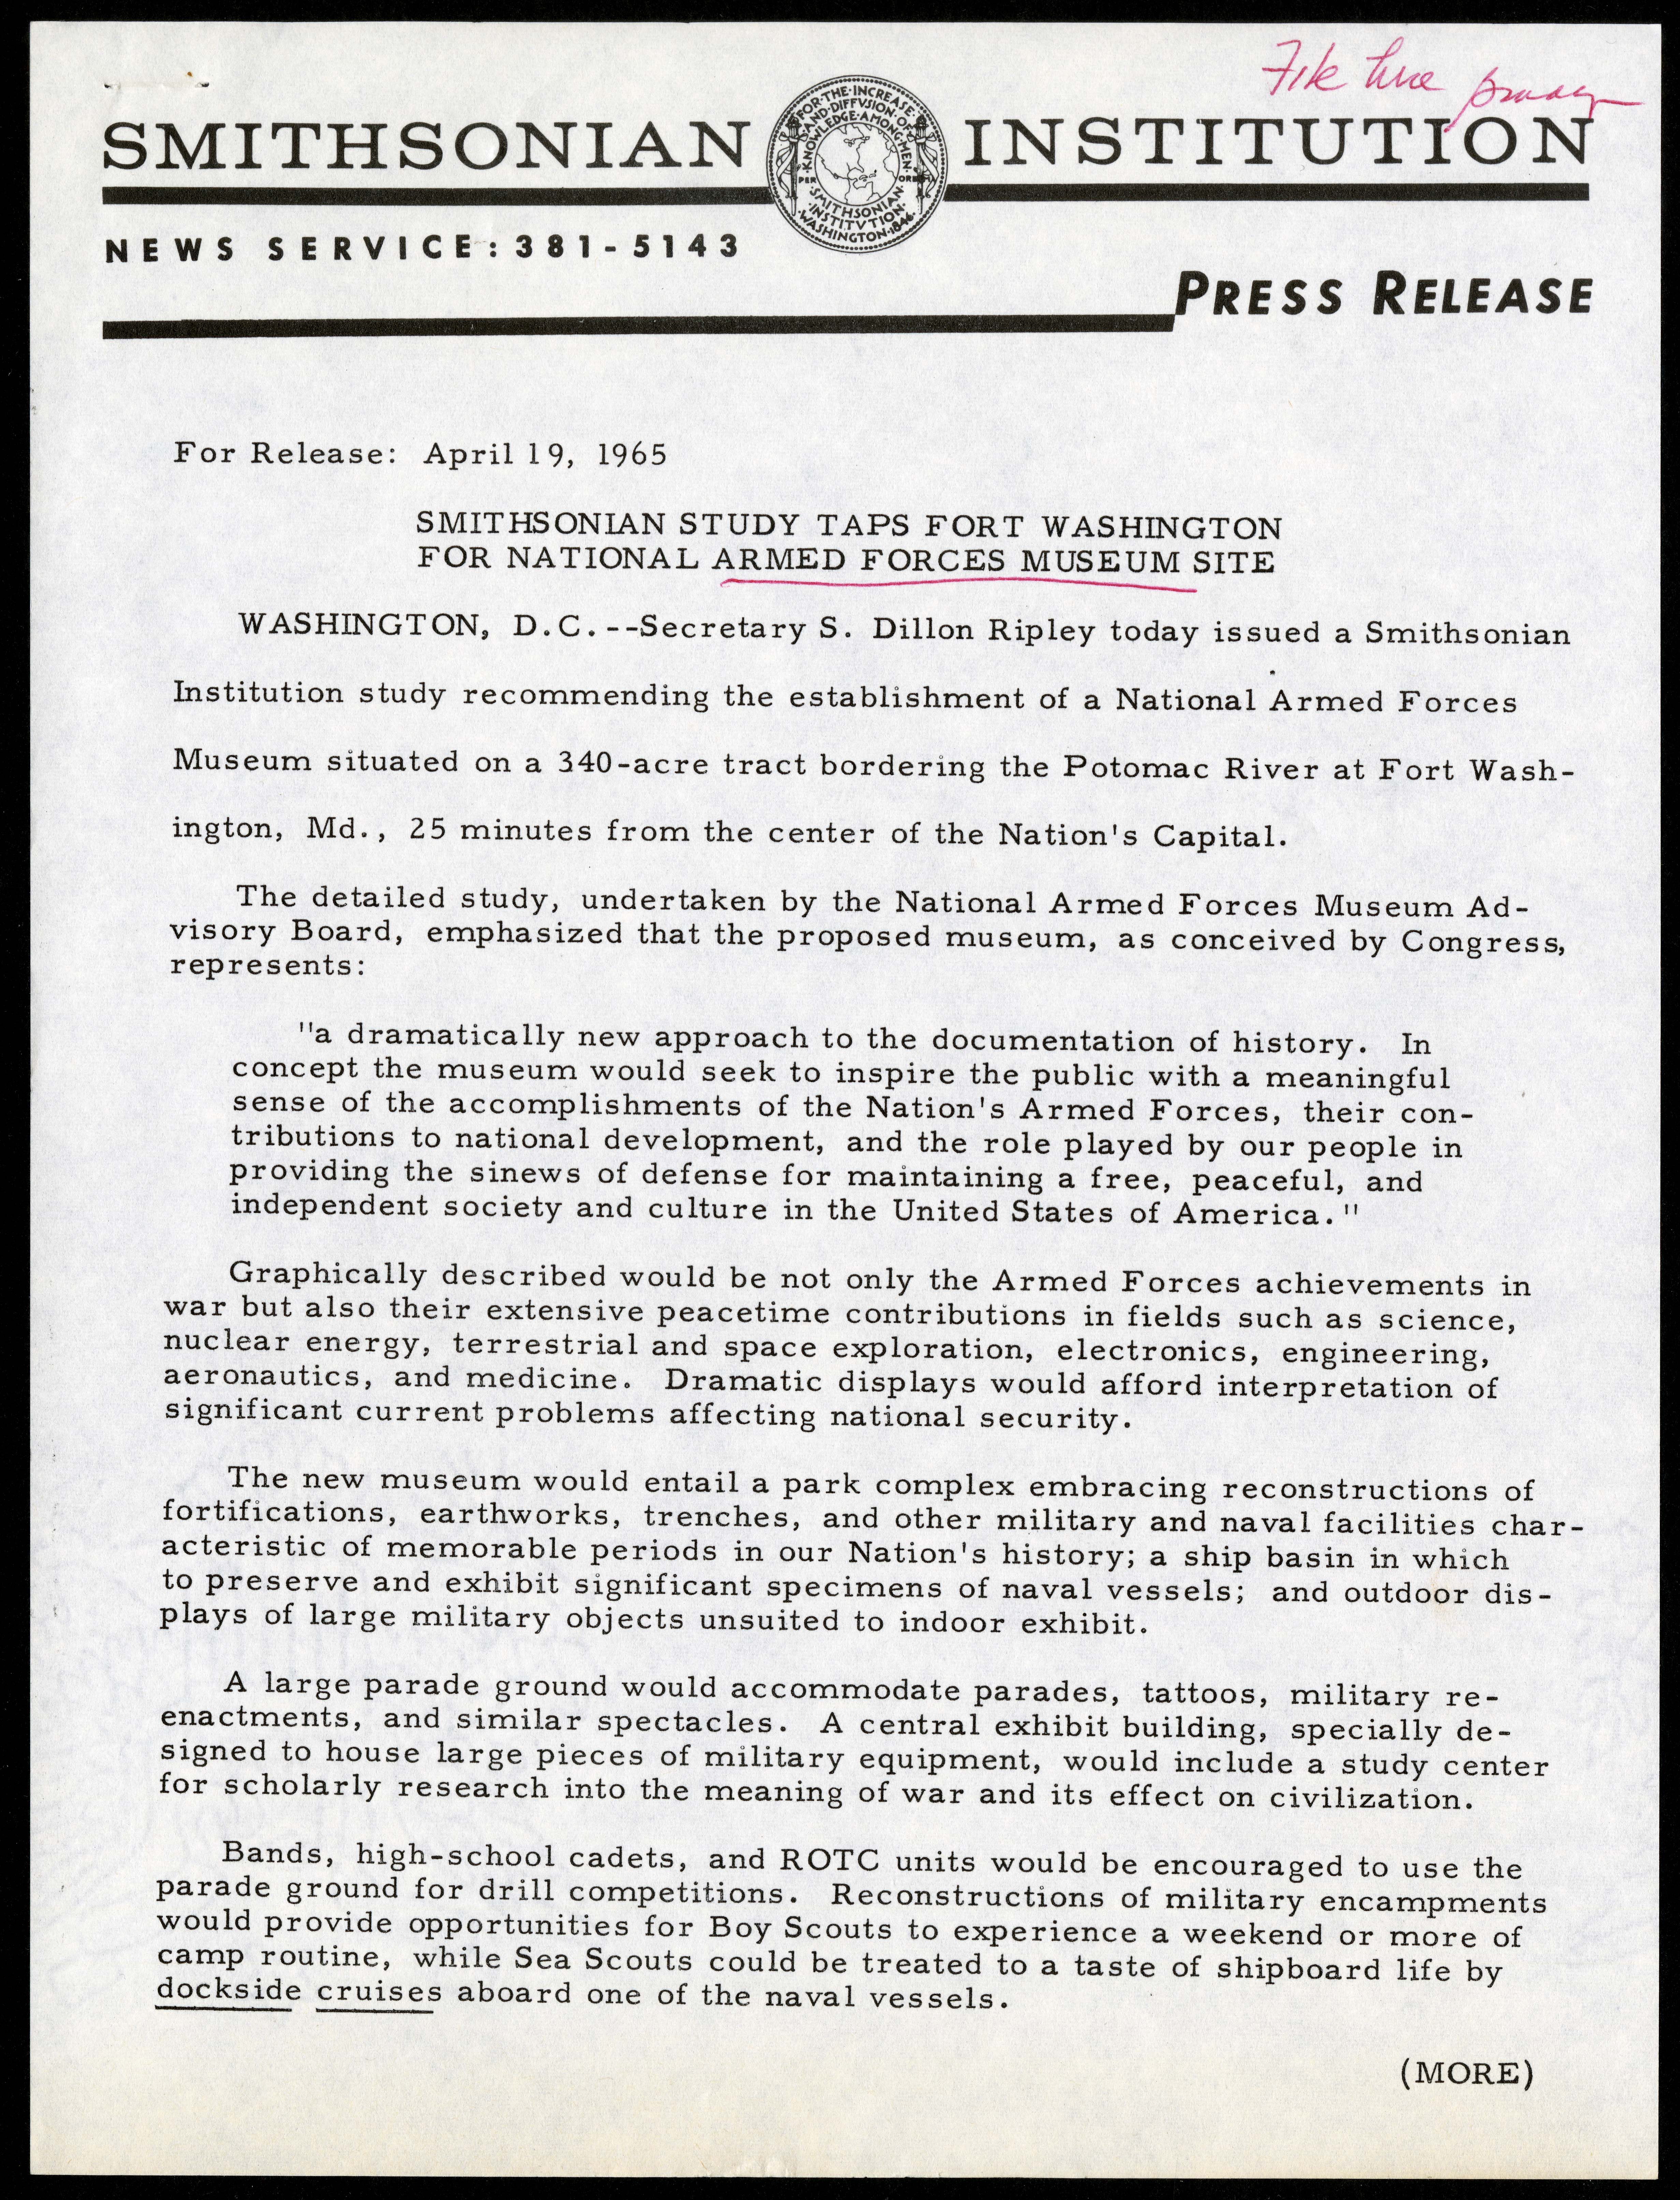 Official press release announcing the National Armed Forces Museum, April 19, 1965.